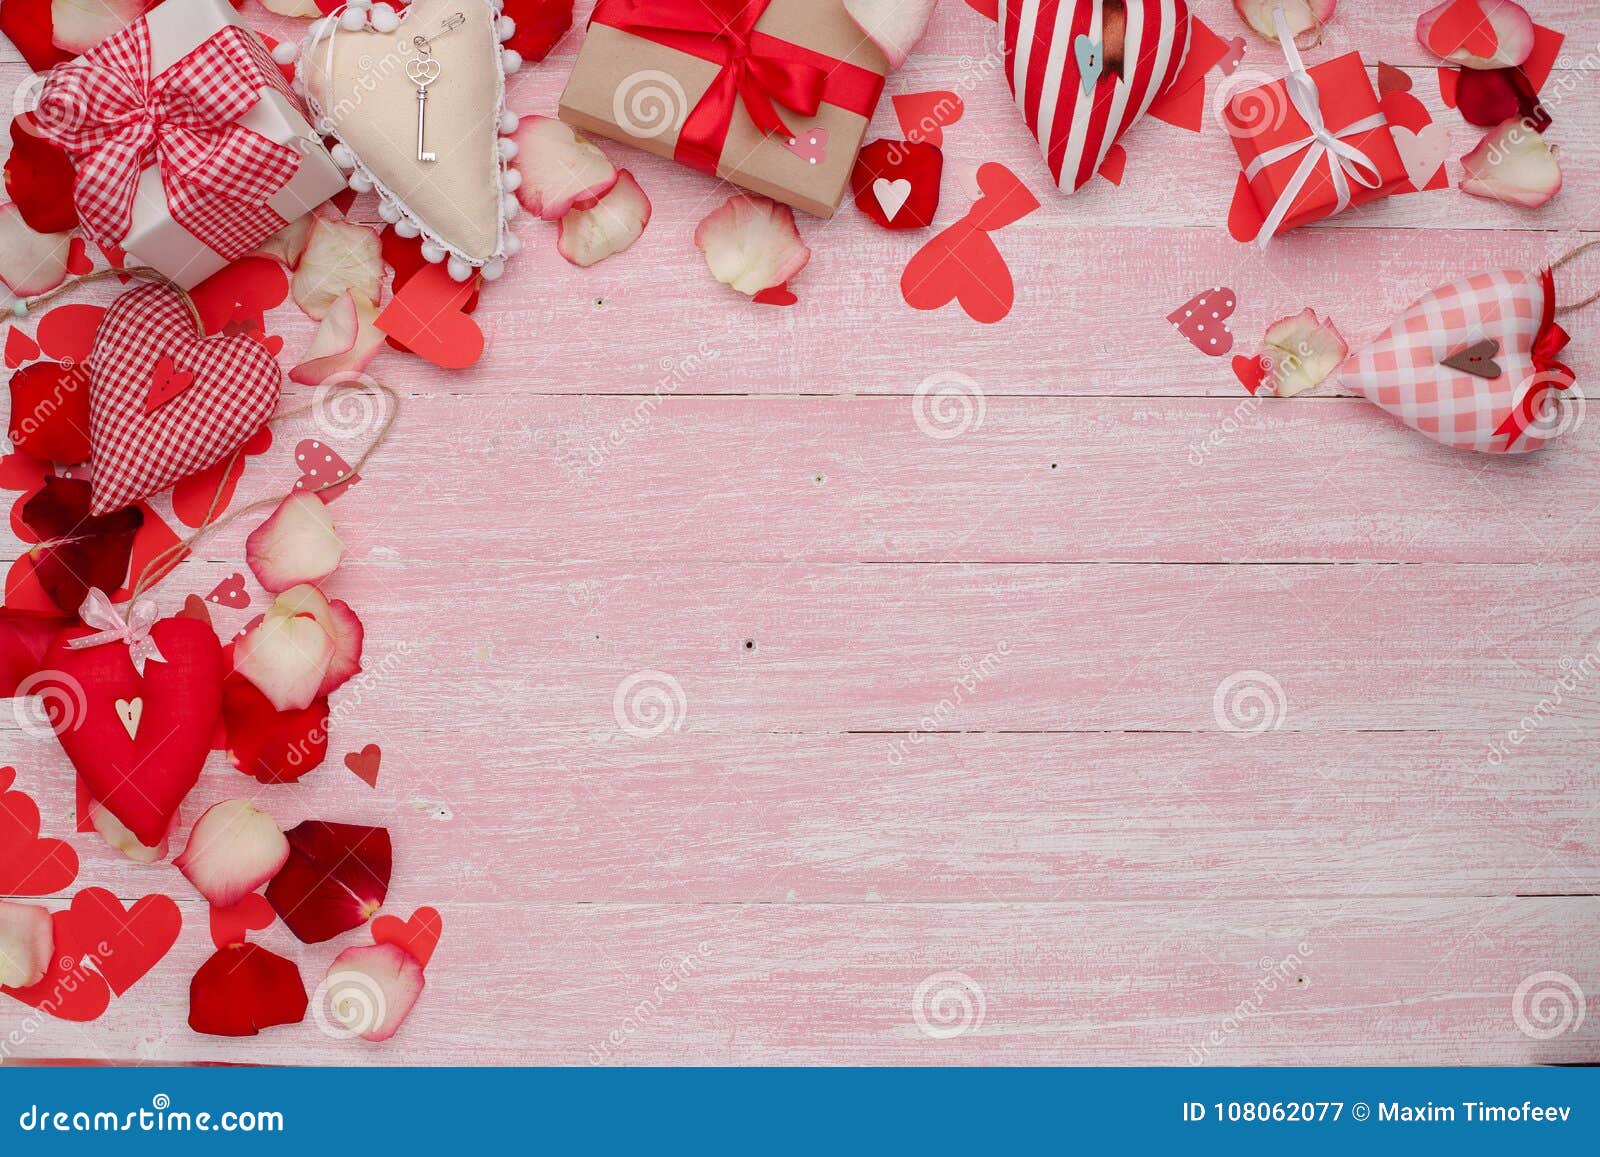 Happy Valentines Day Love Celebration in a Rustic Style Isolated. Stock ...